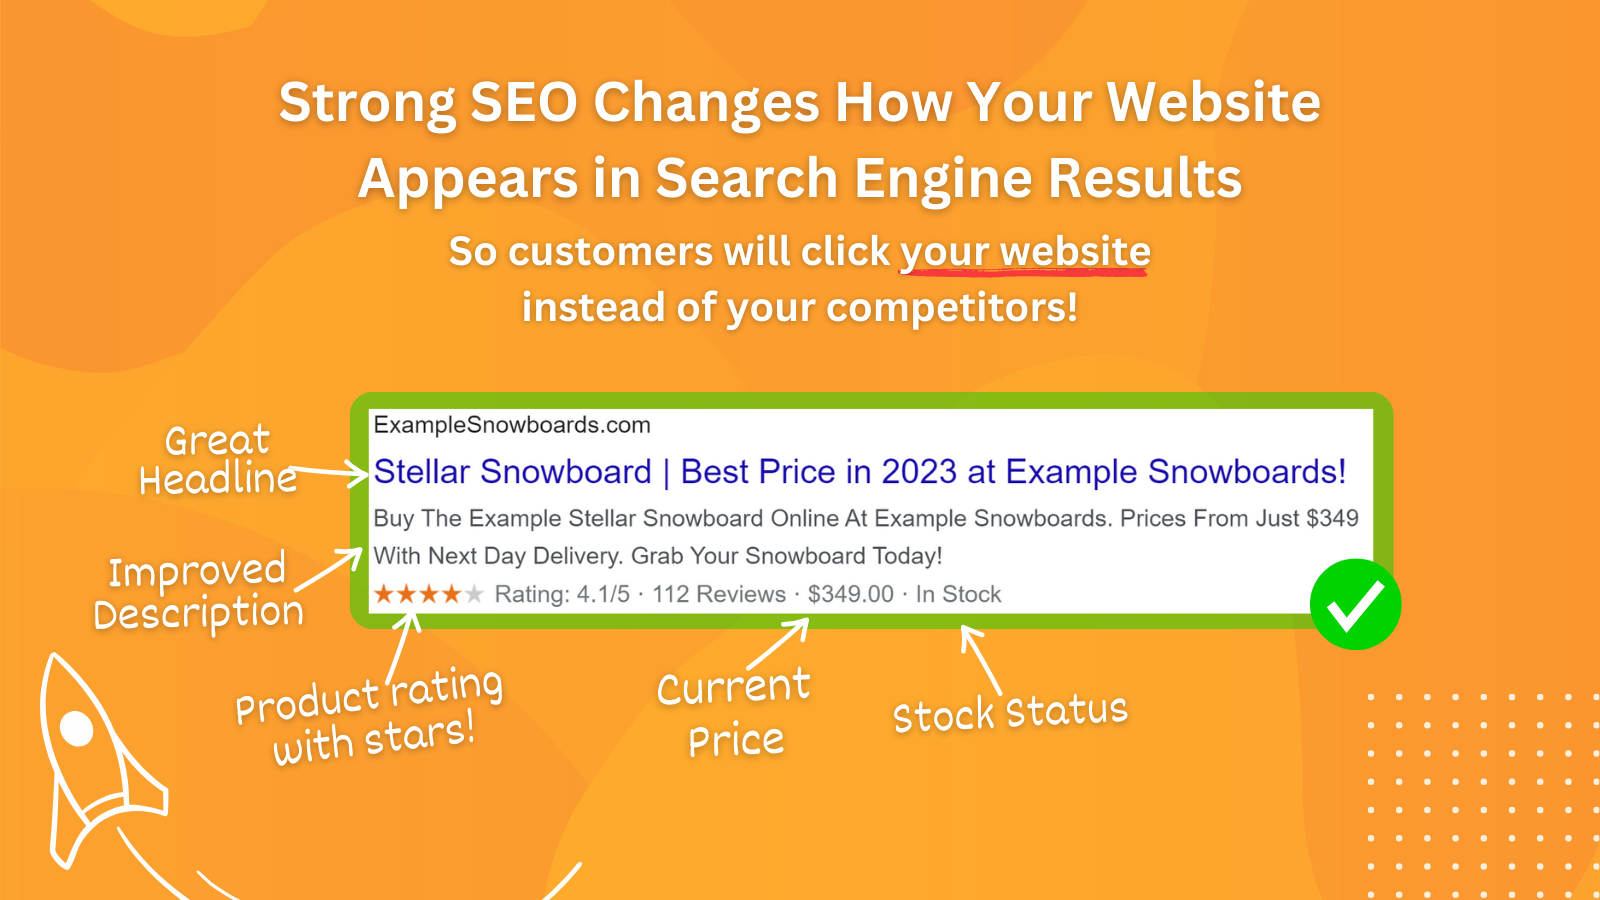 Strong SEO improves your search engine results